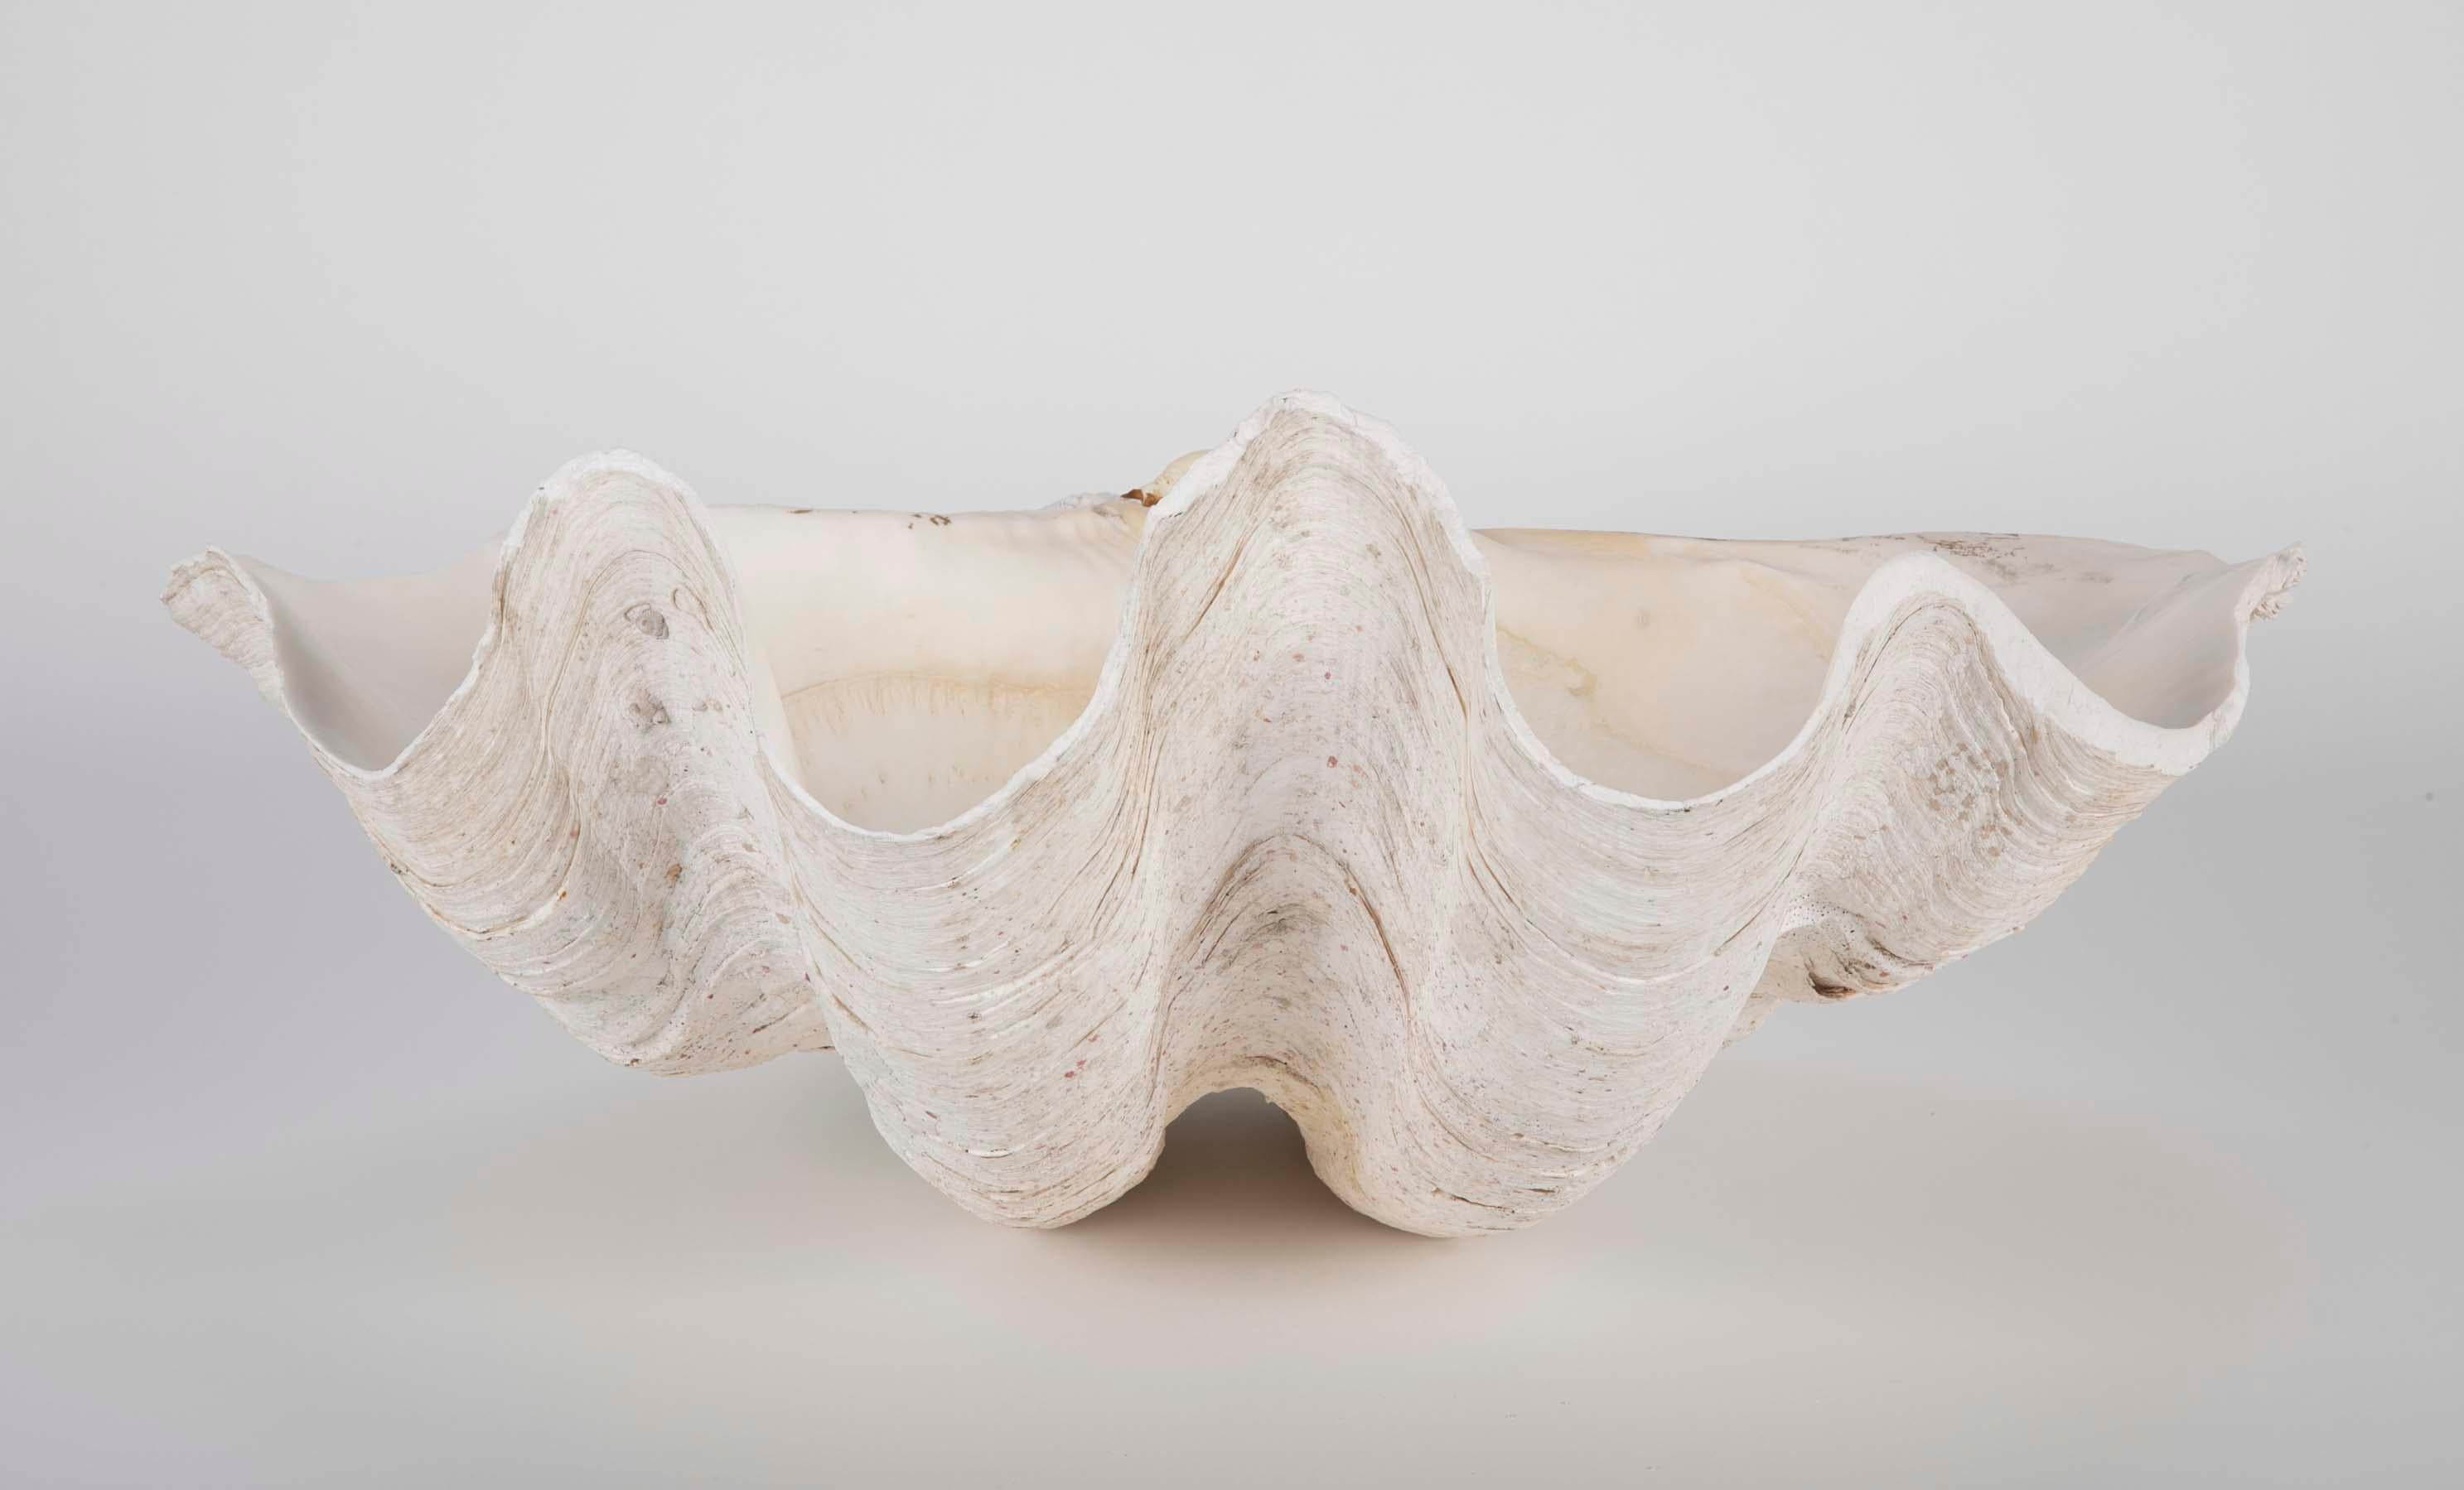 Wonderful example of a giant clam shell from the Indian Ocean. The bleached white color and high profile of the scallops make this a distinctive centrepiece or decoration. I have included some photos of its use in a designers show house, placed high